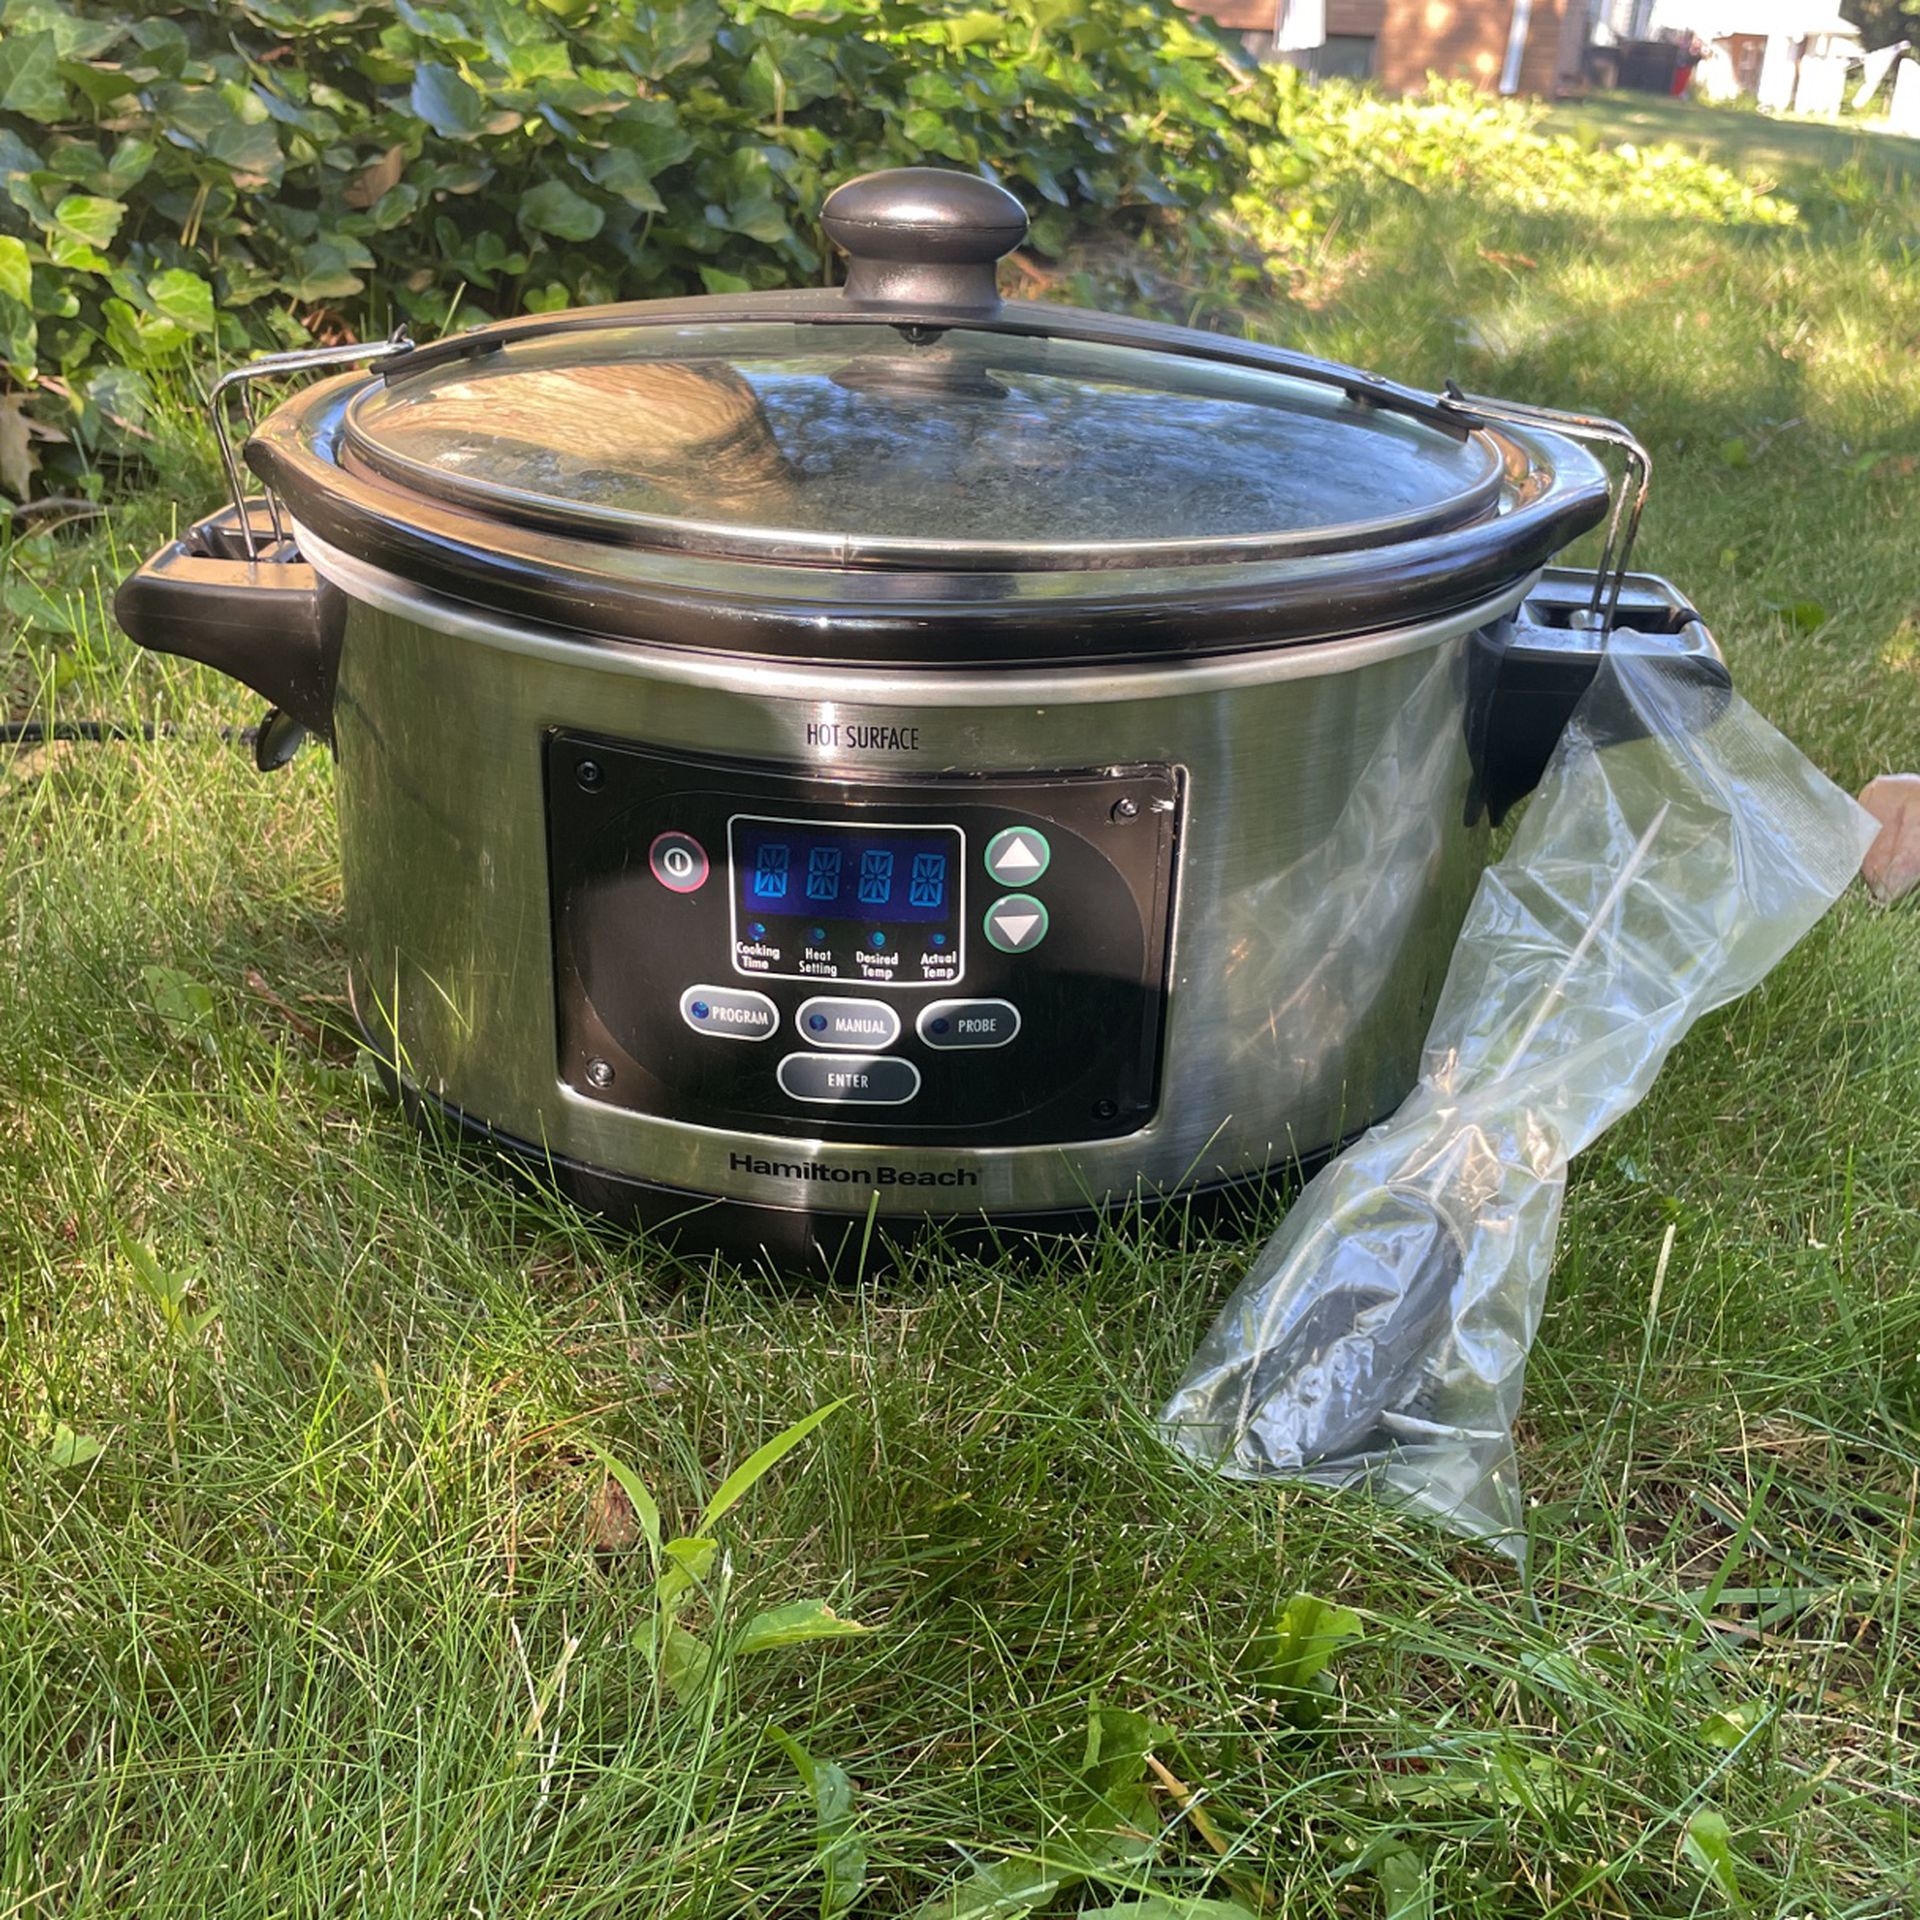 Slow Cooker - Almost New!